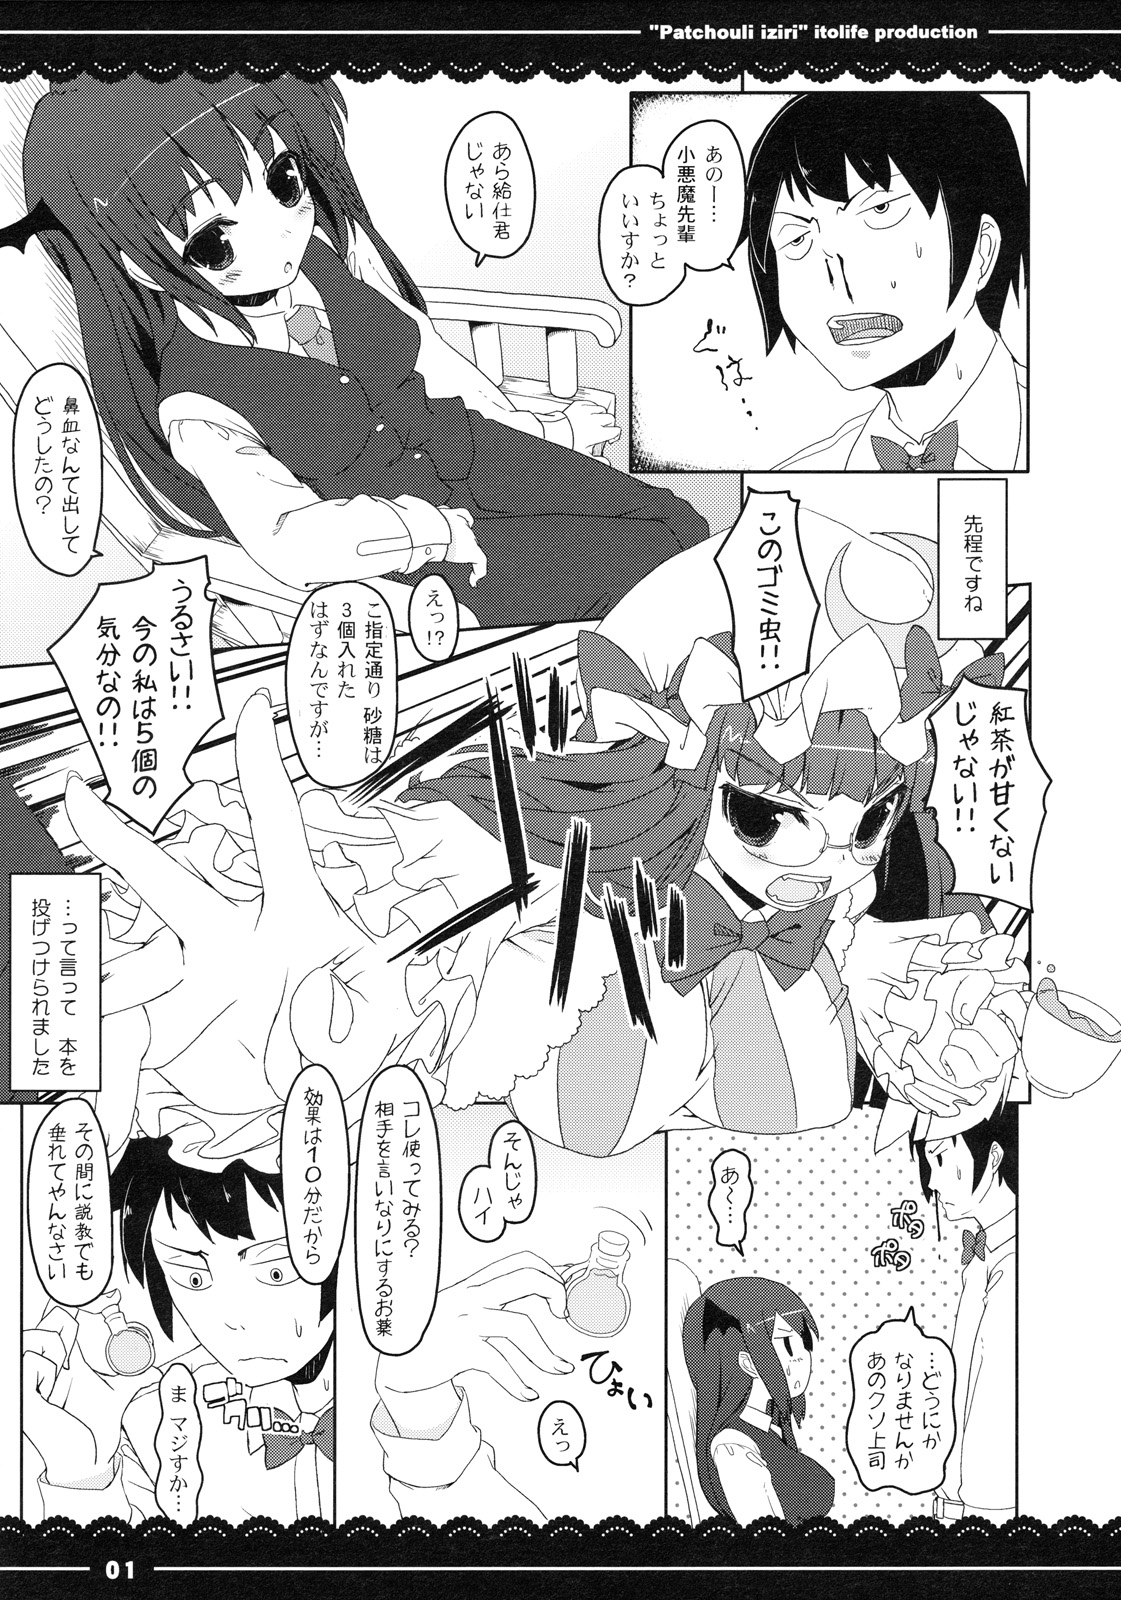 (C79) [Ito Life] Patchouli Ijiri (Touhou Project) (C79) (同人誌) [伊東ライフ] パチュリイジリ (東方)